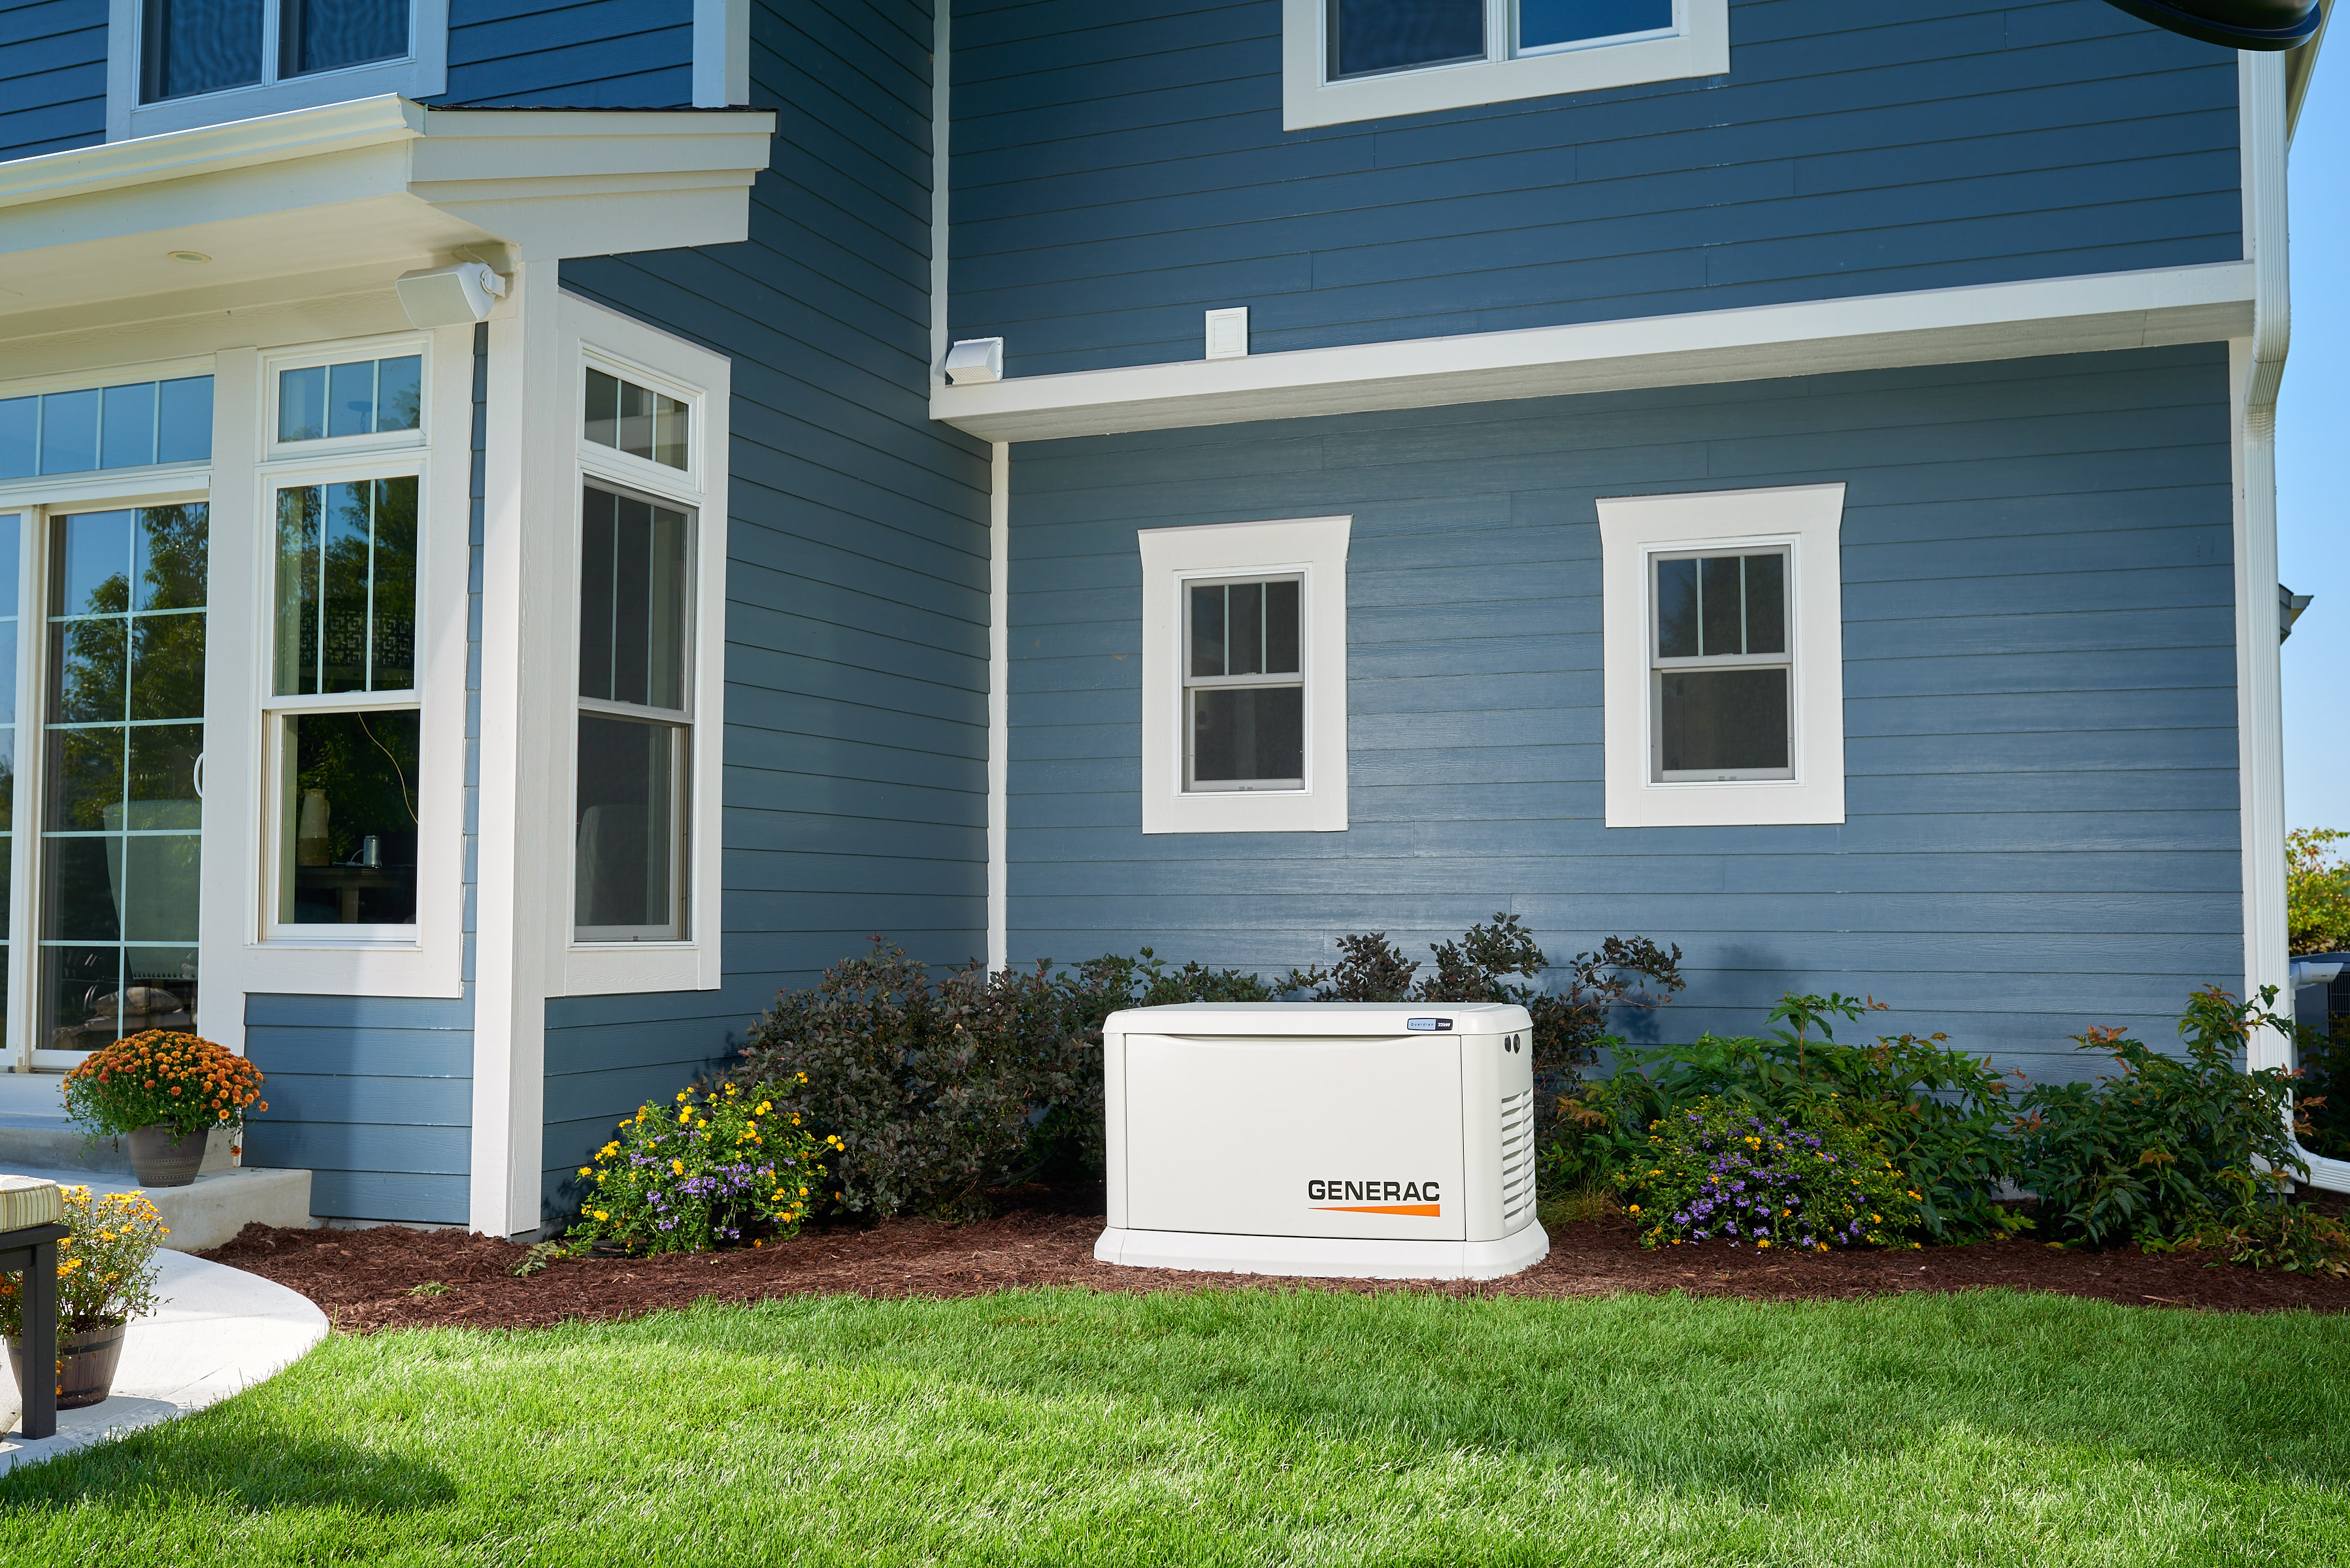 Buying a Generator Protects Your Home or Business